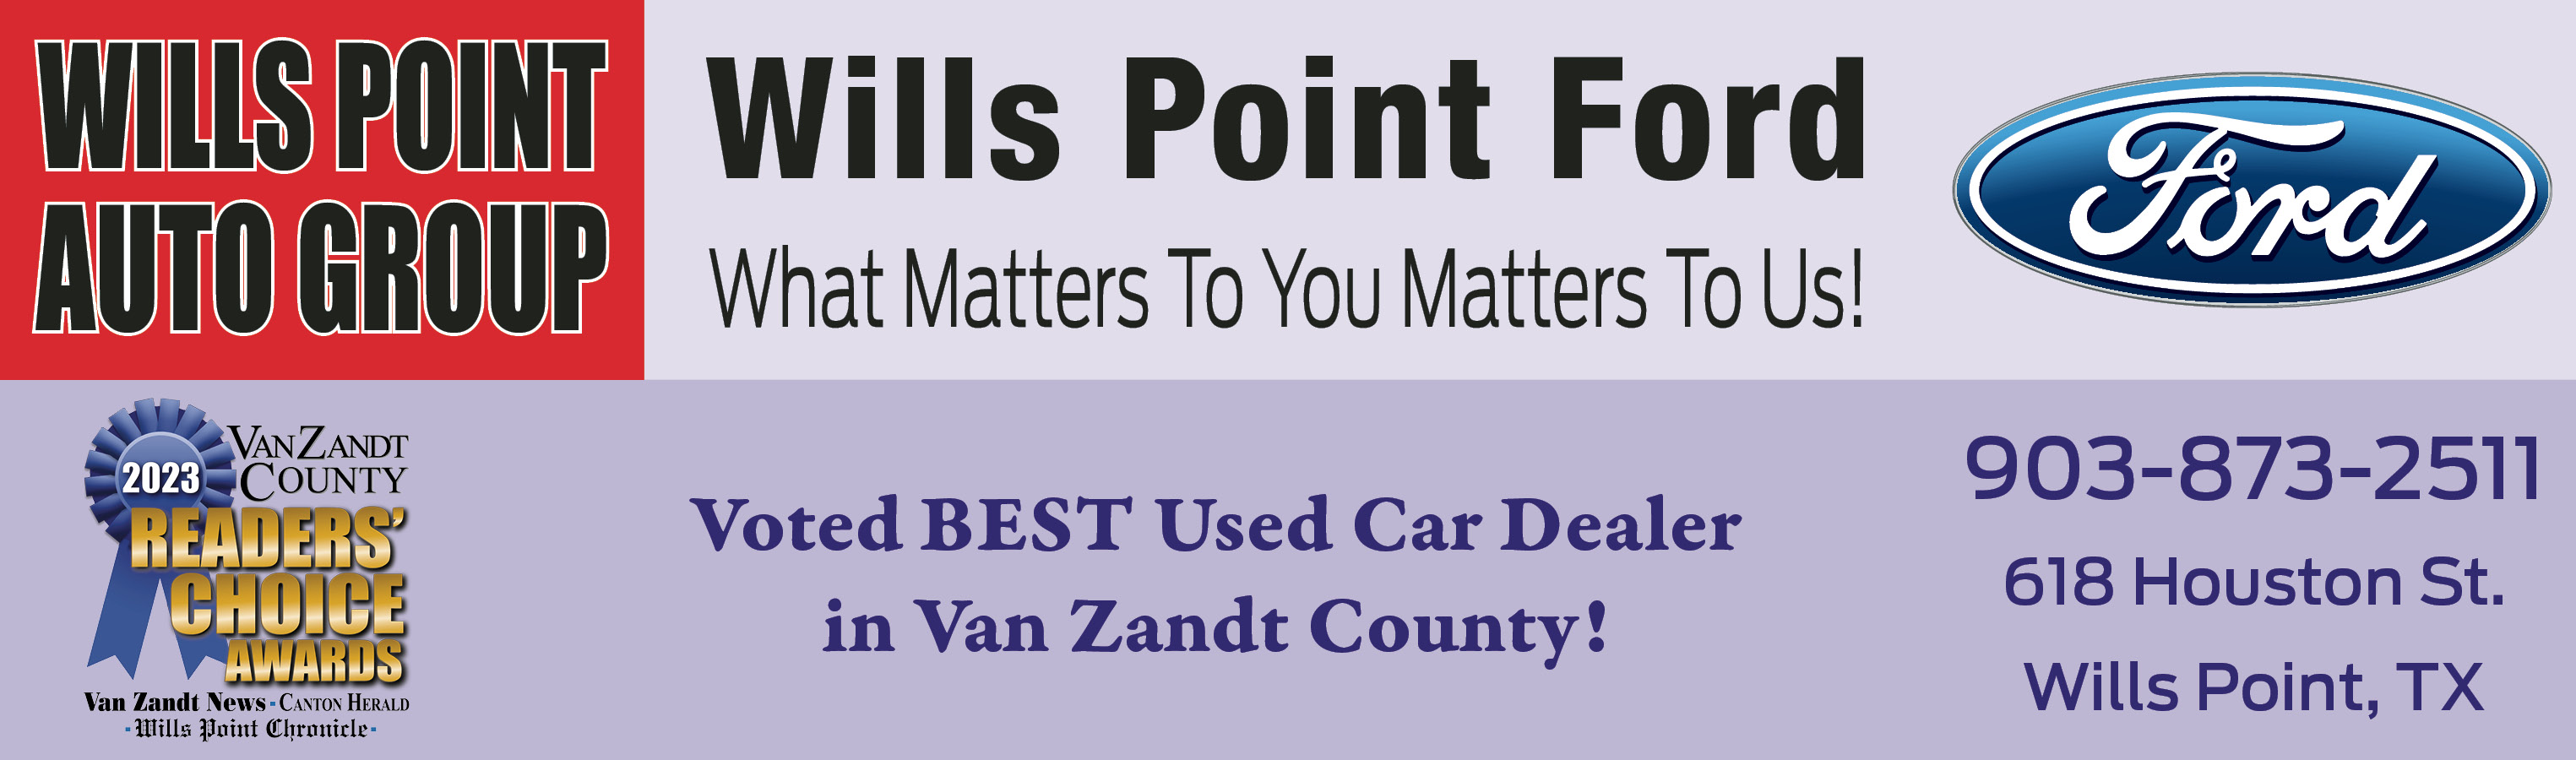 Wills Point Ford Banner Ad